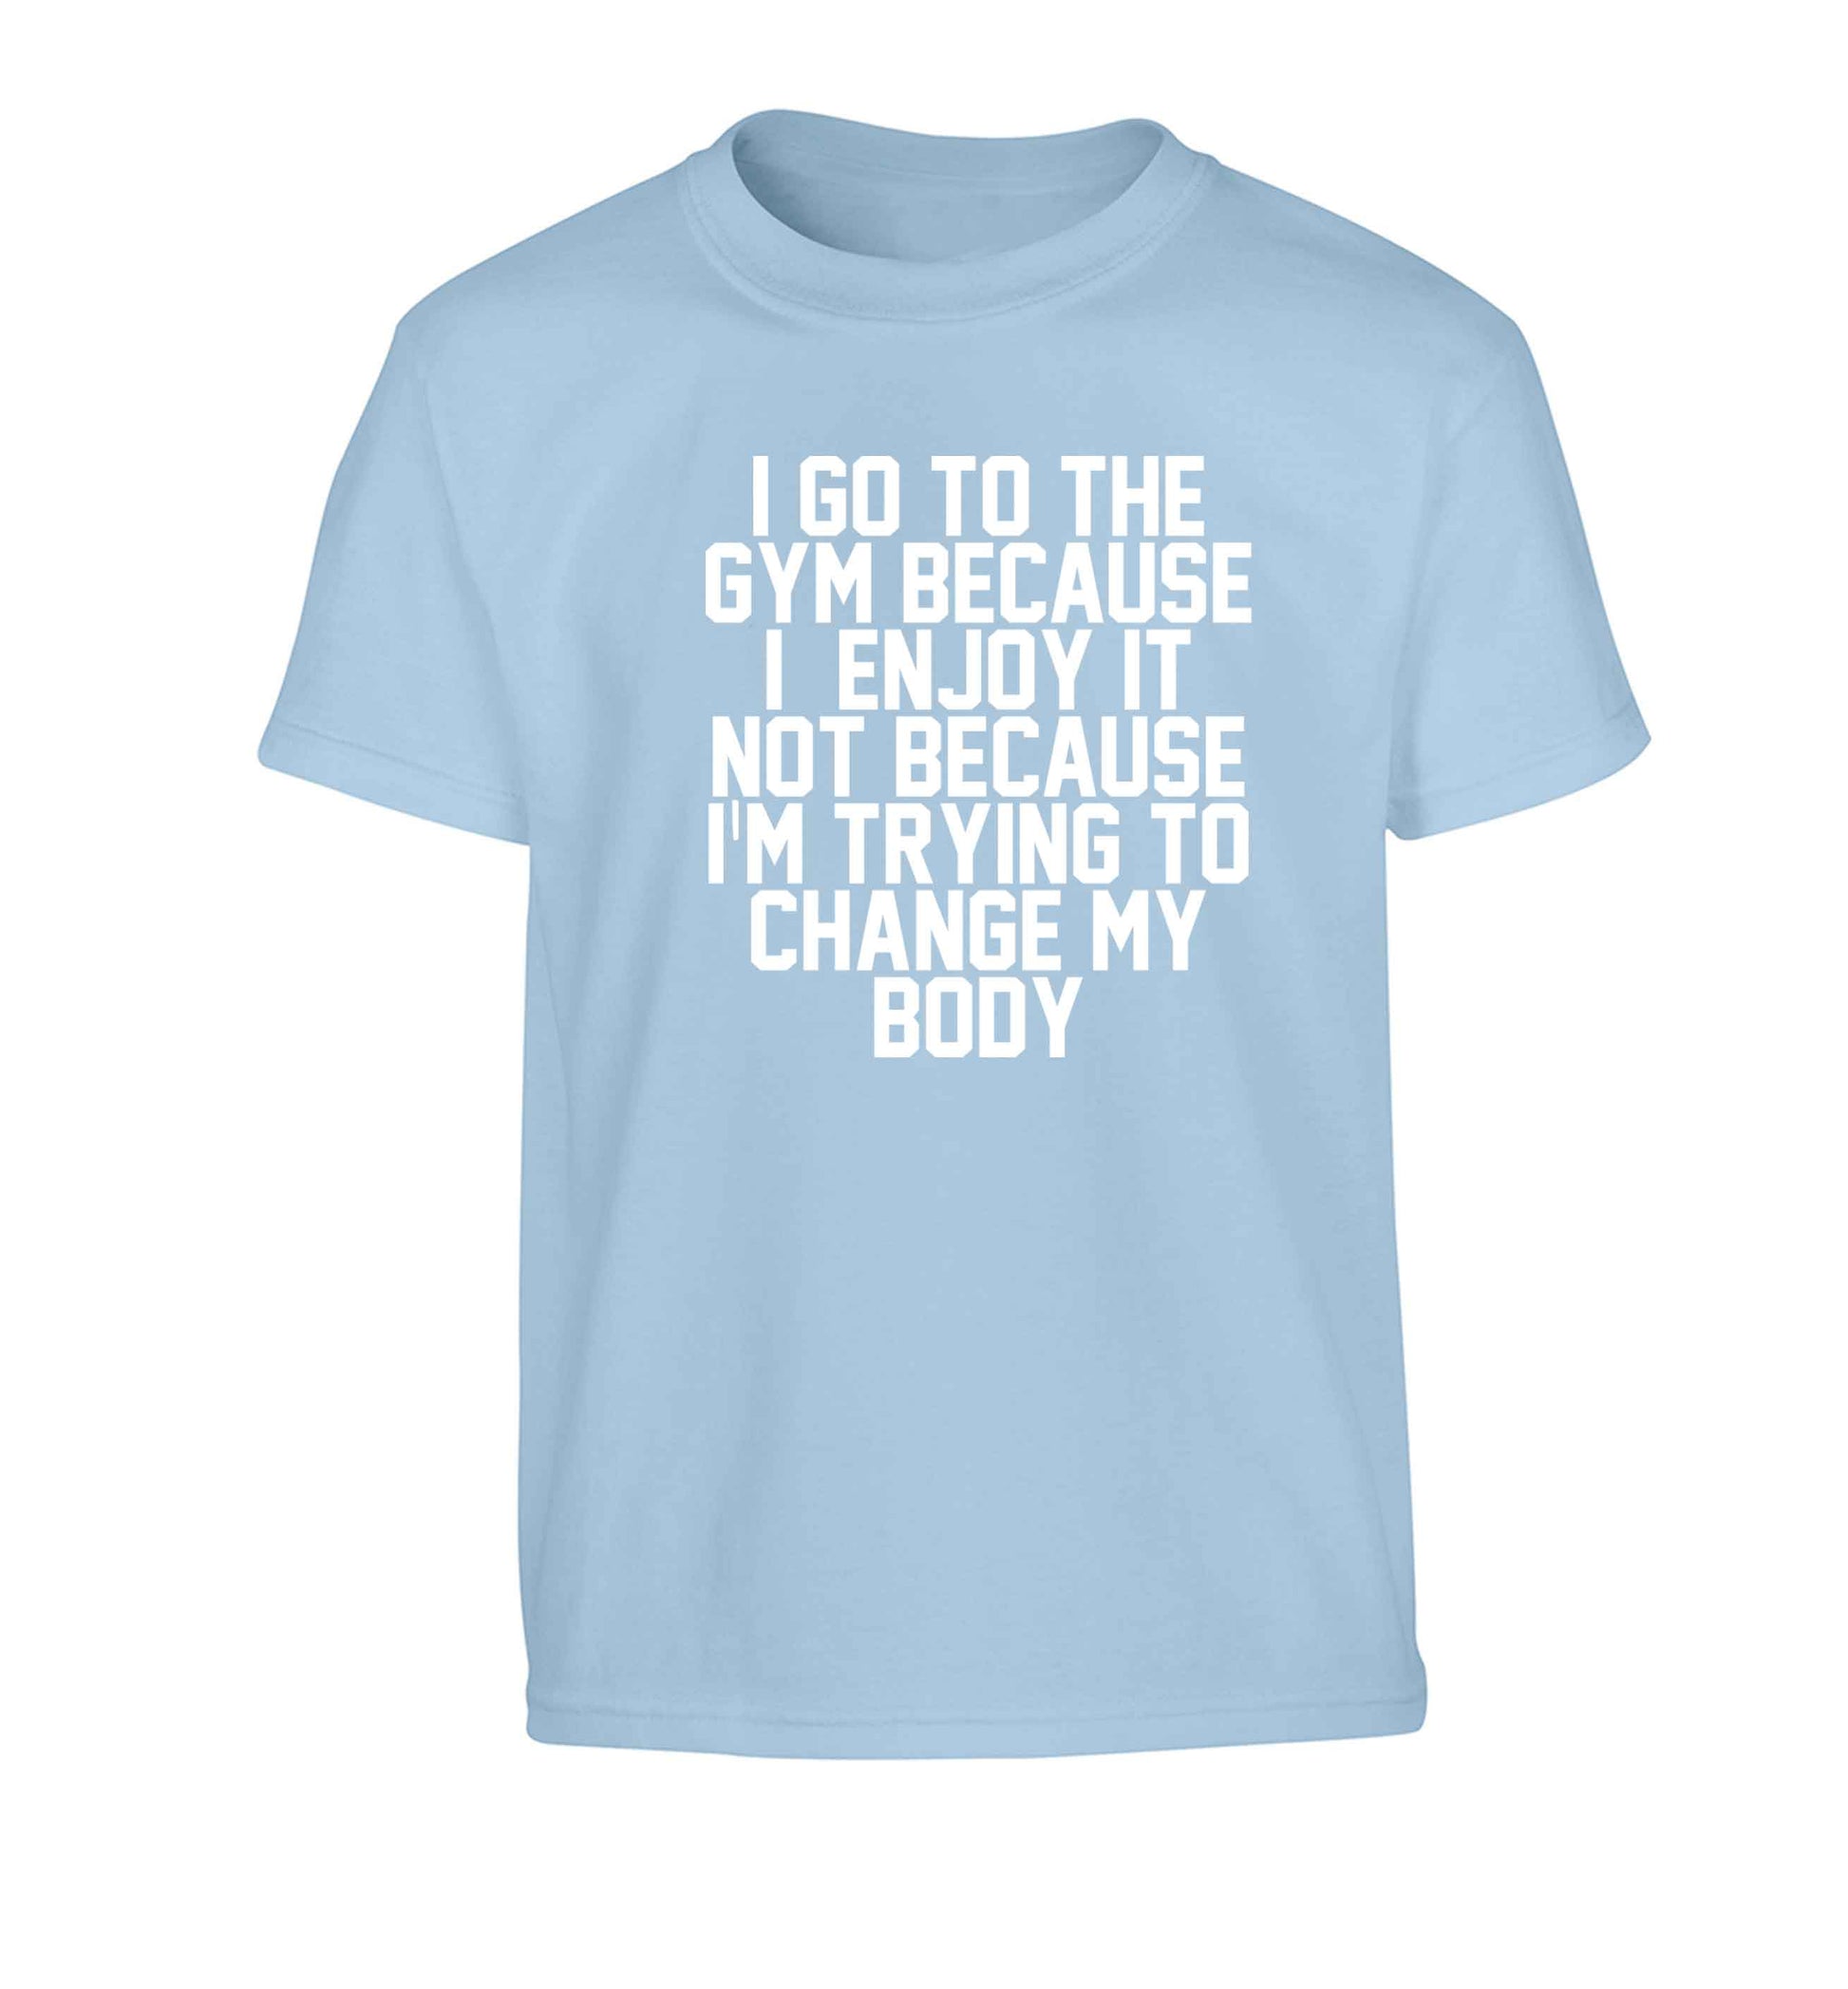 I go to the gym because I enjoy it not because I'm trying to change my body Children's light blue Tshirt 12-13 Years